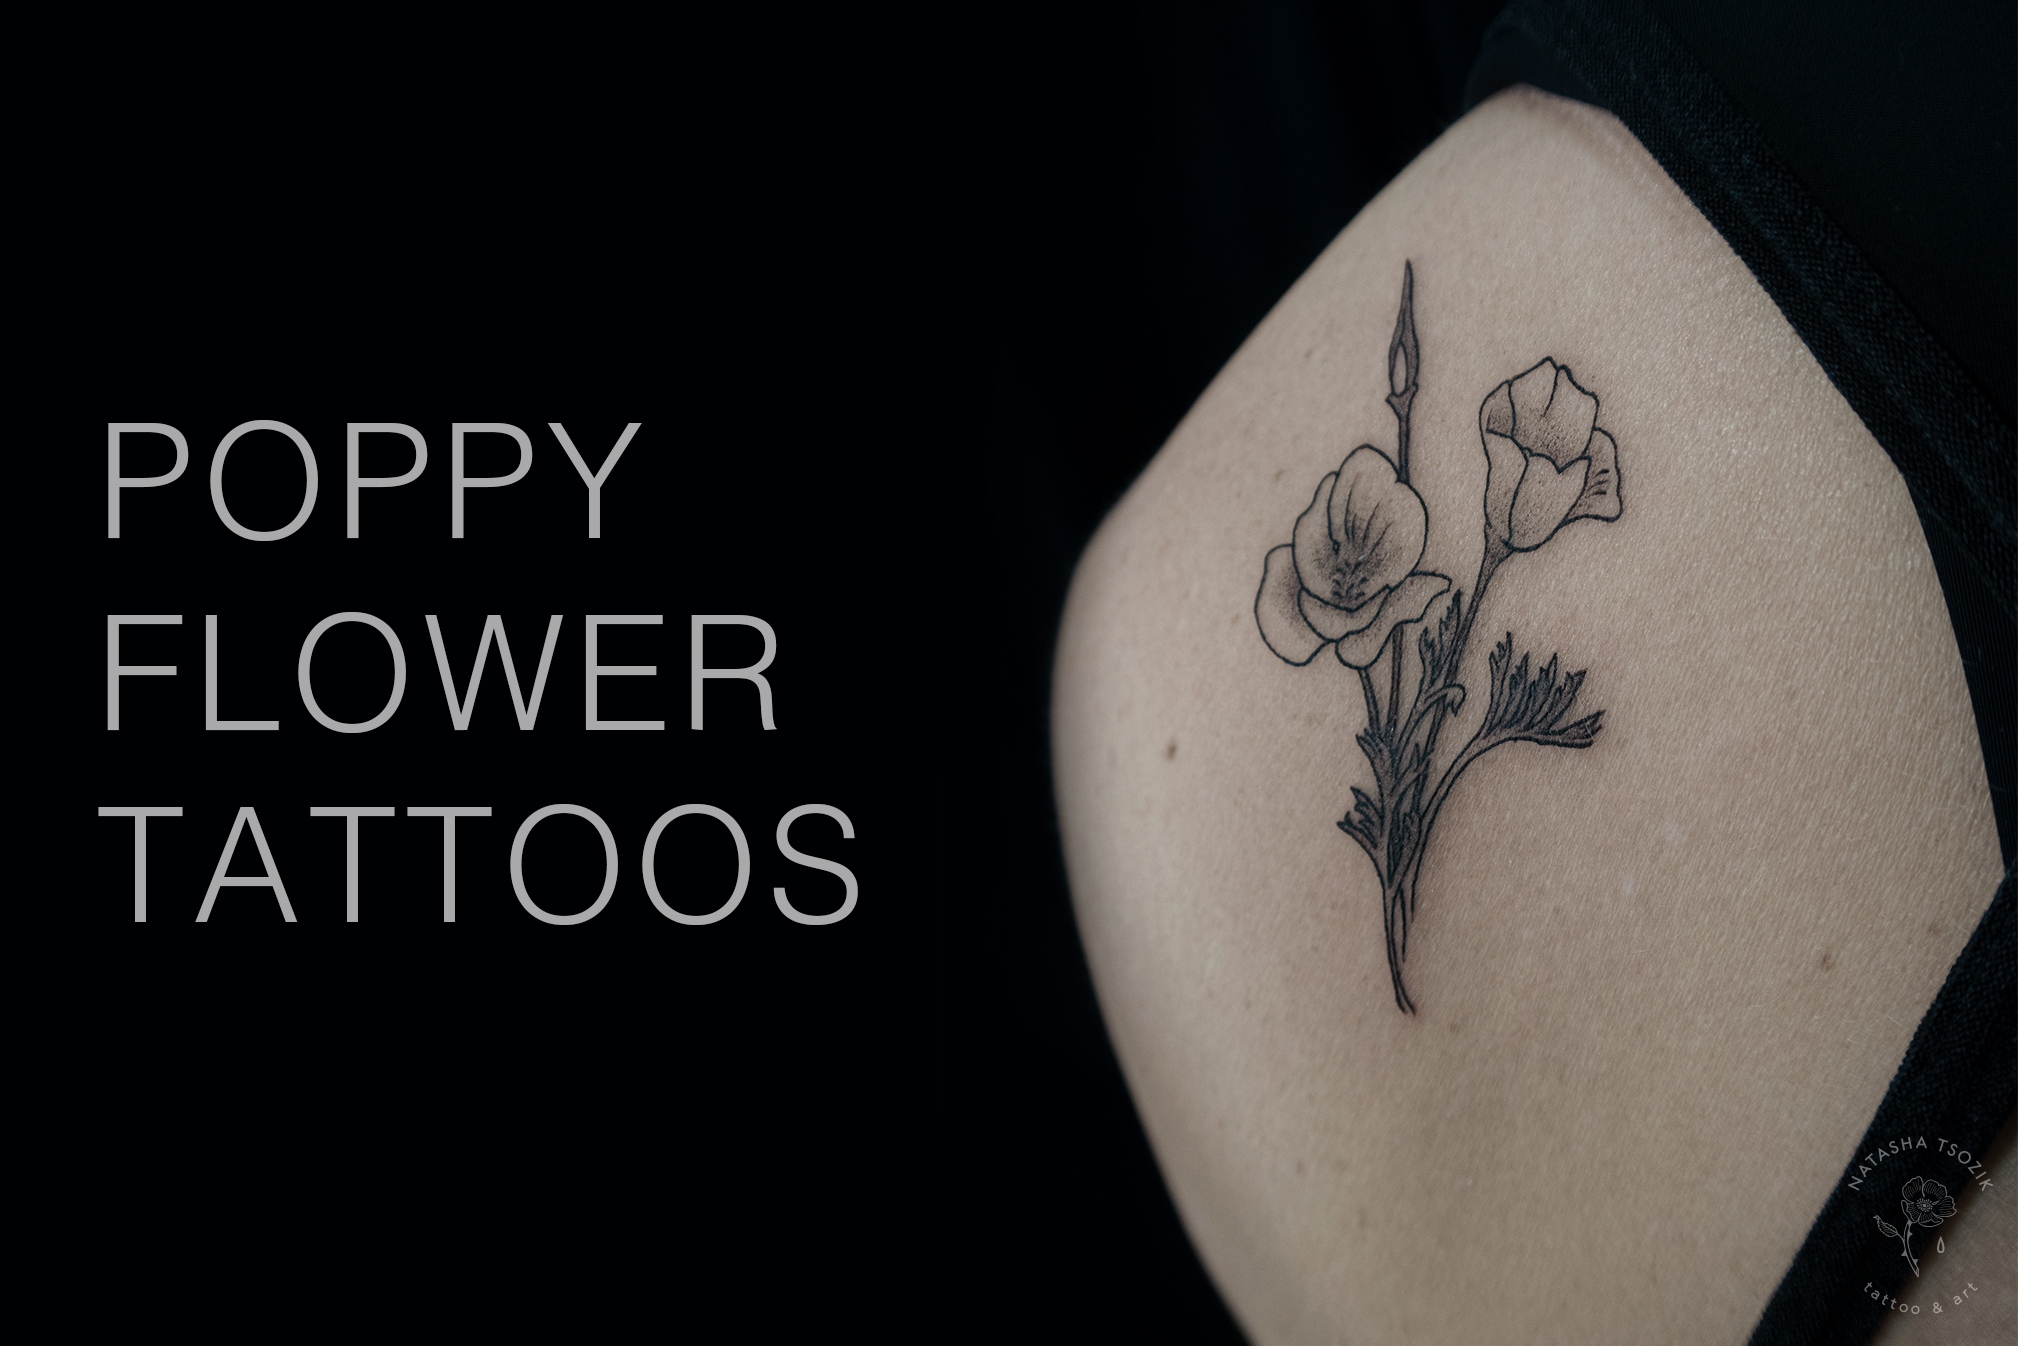 Poppy flower and lavender tattoo located on the inner